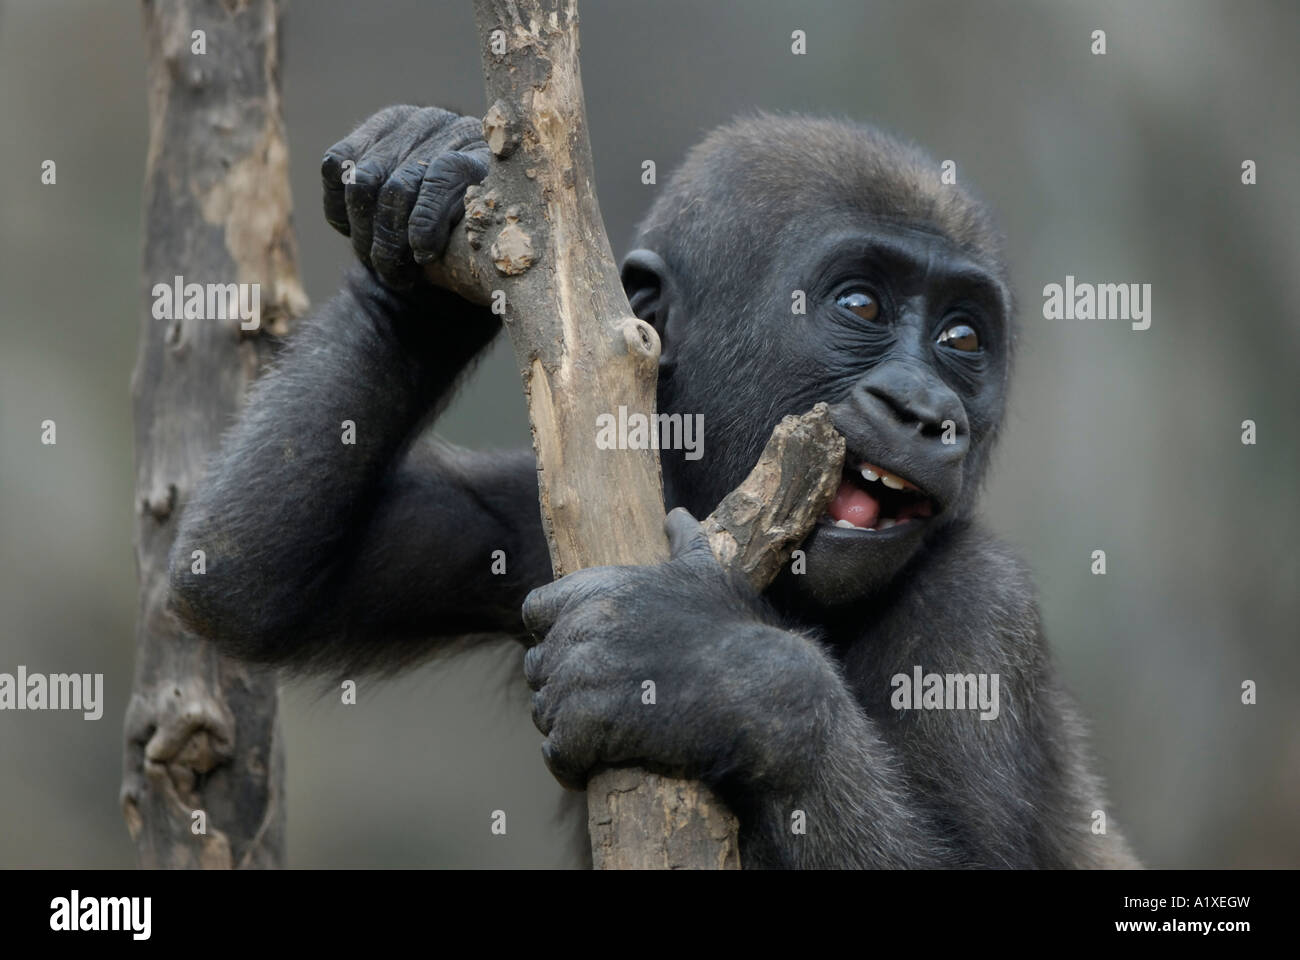 Playful baby gorilla chewing on stick Stock Photo